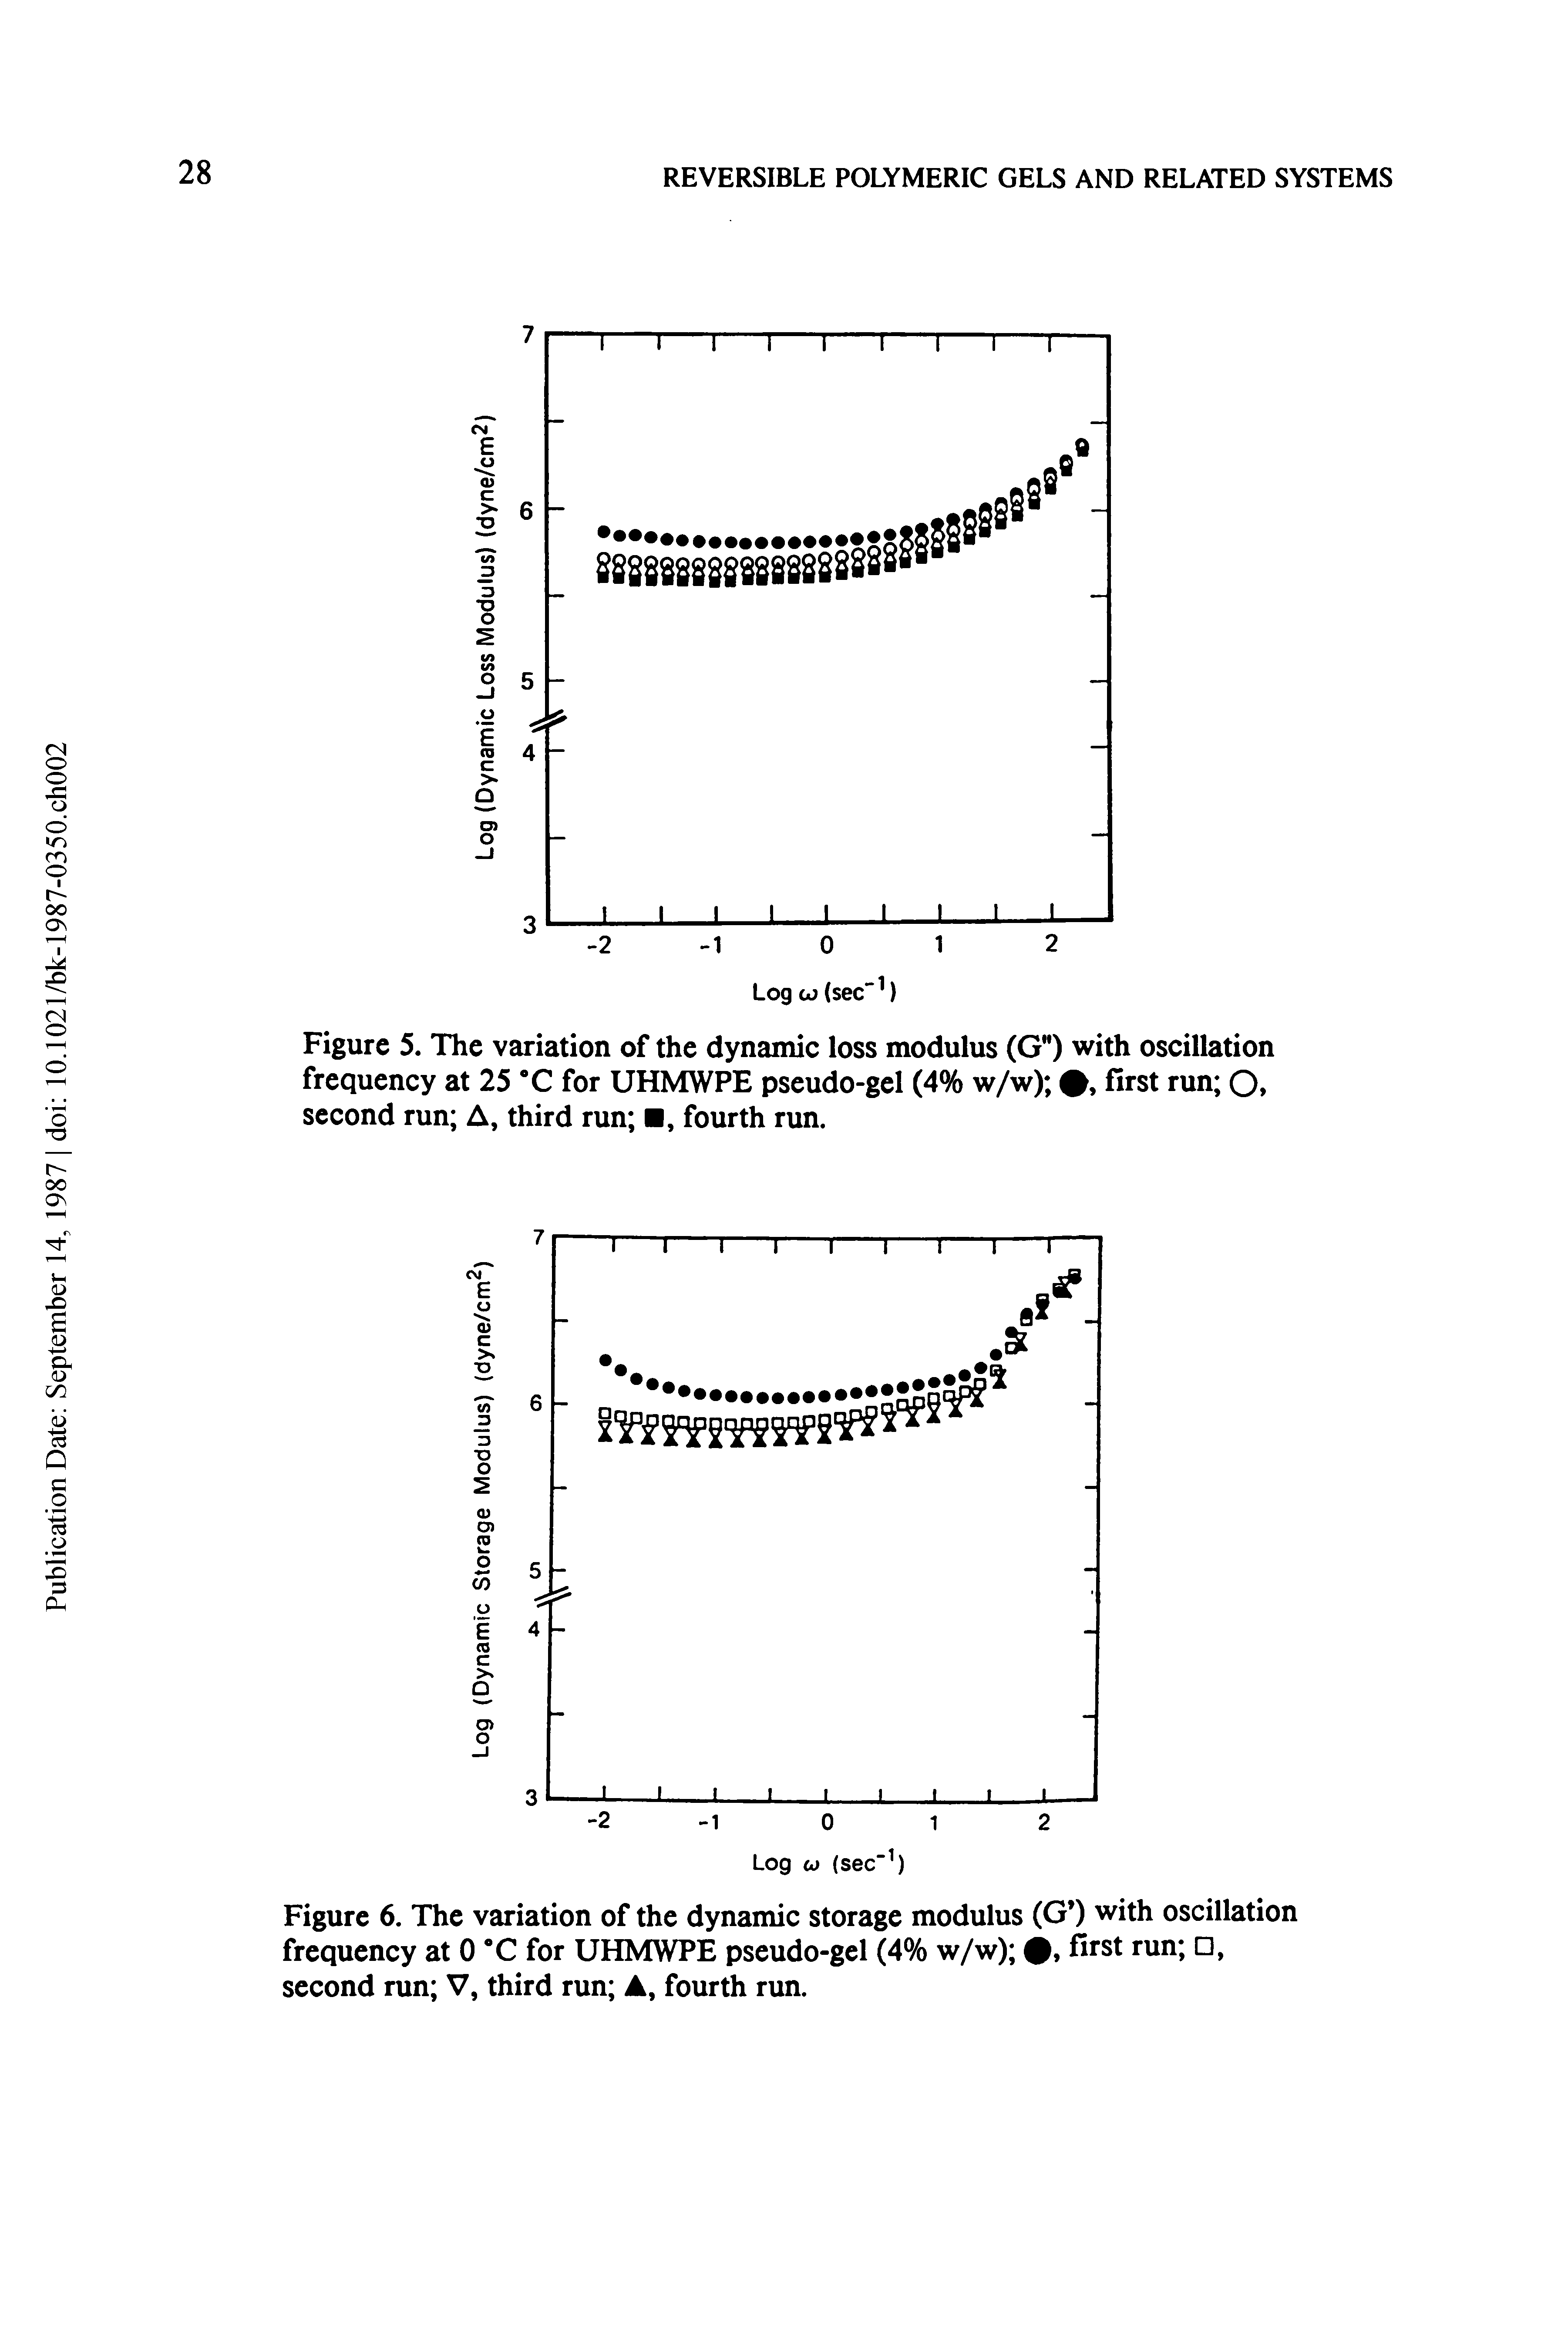 Figure 5. The variation of the dynamic loss modulus (G") with oscillation frequency at 25 C for UHMWPE pseudo-gel (4% w/w) first run 0 second run A, third run , fourth run.